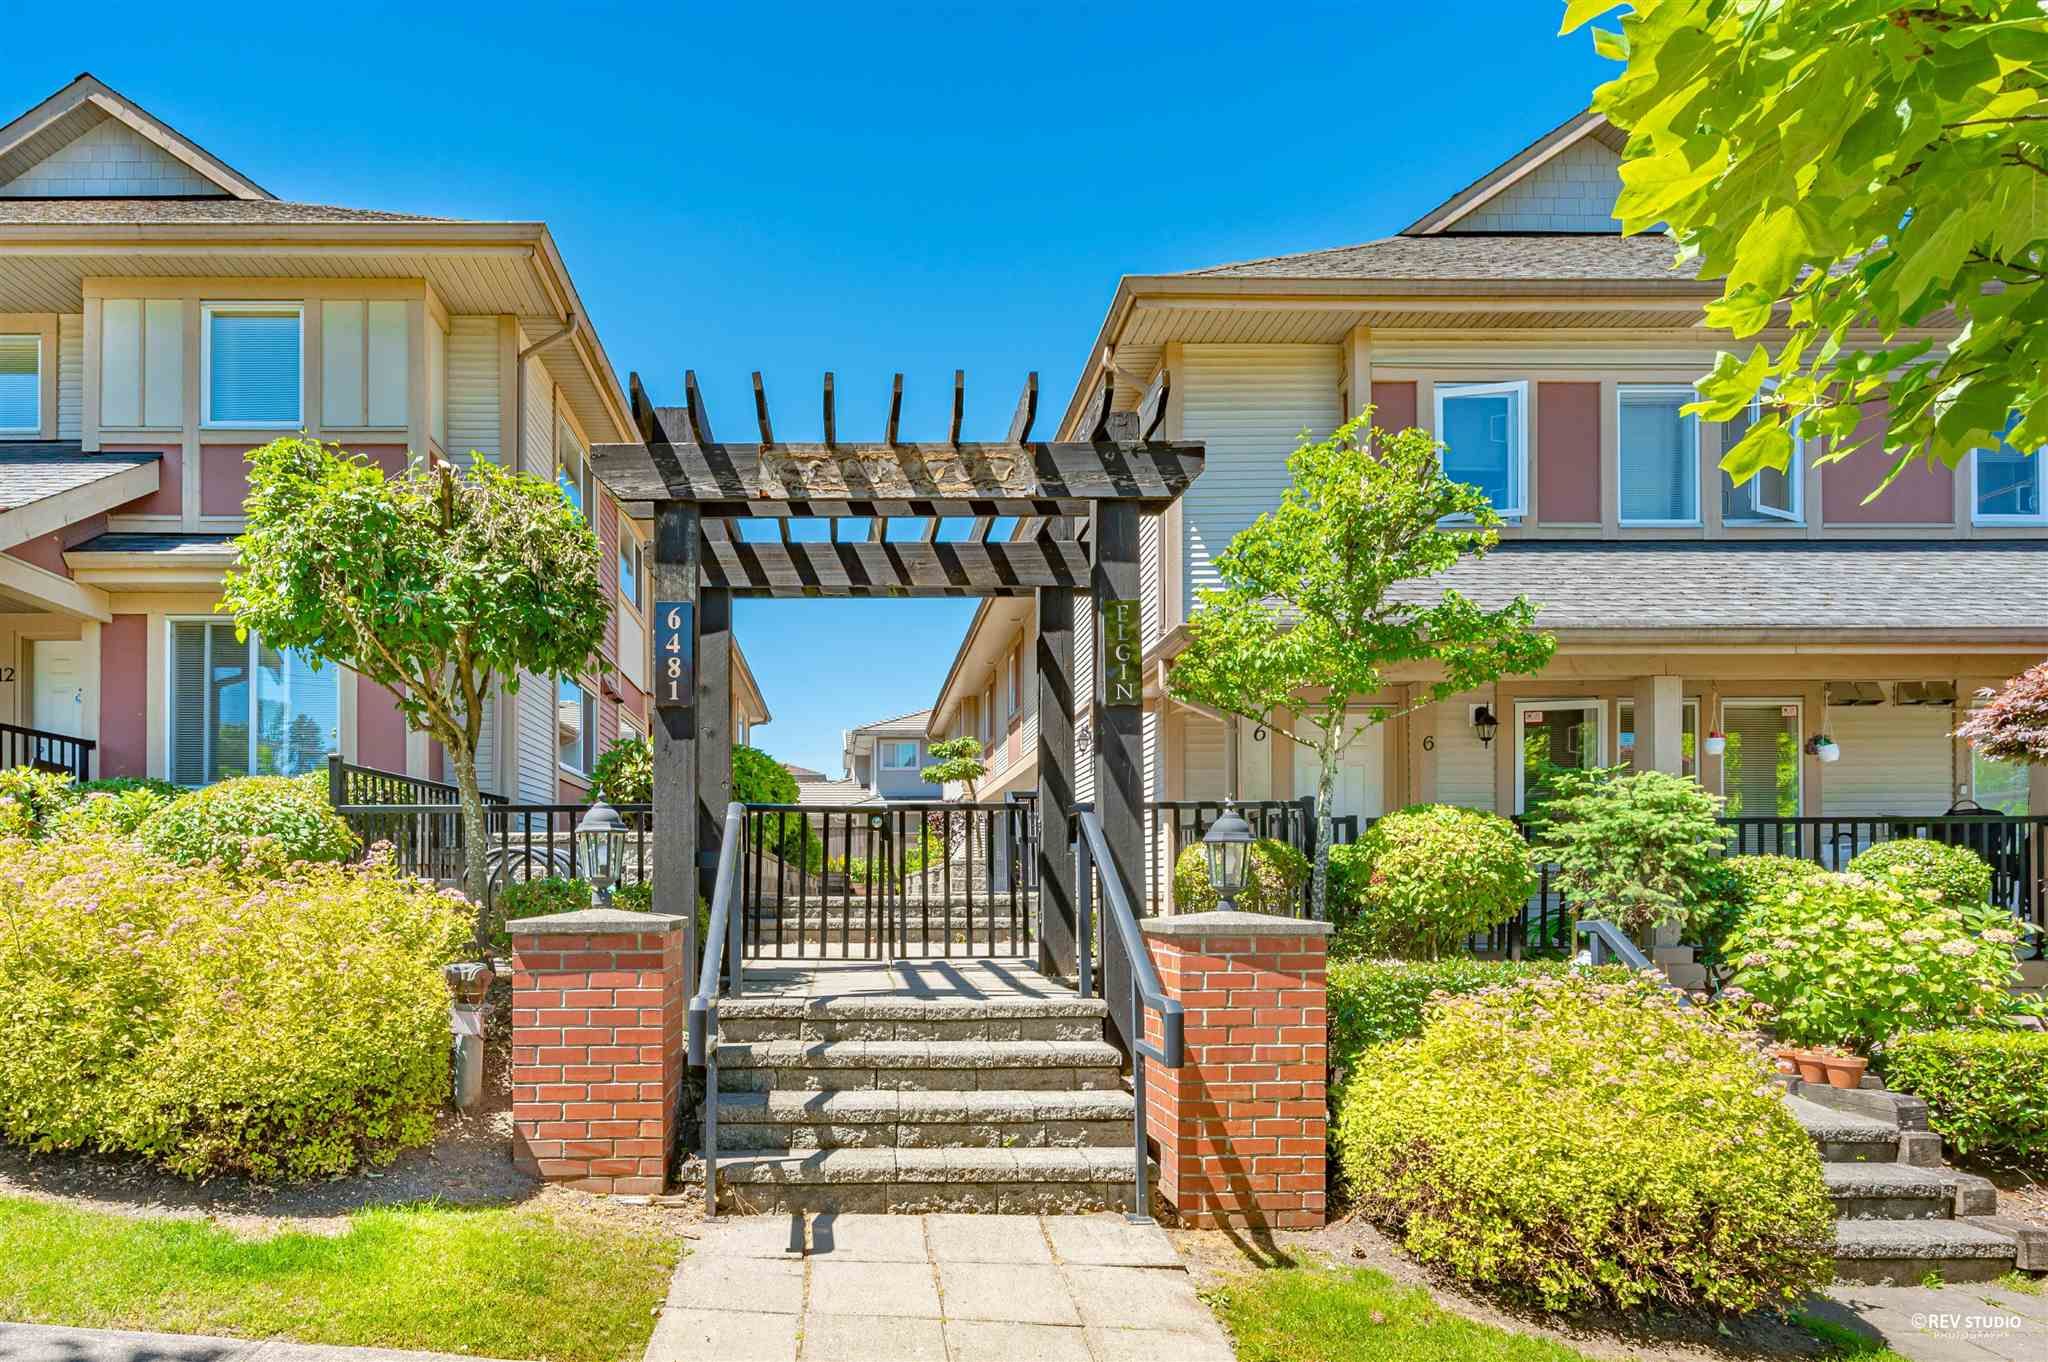 Main Photo: 2 6481 ELGIN AVENUE in Burnaby: Forest Glen BS Townhouse for sale (Burnaby South)  : MLS®# R2597126